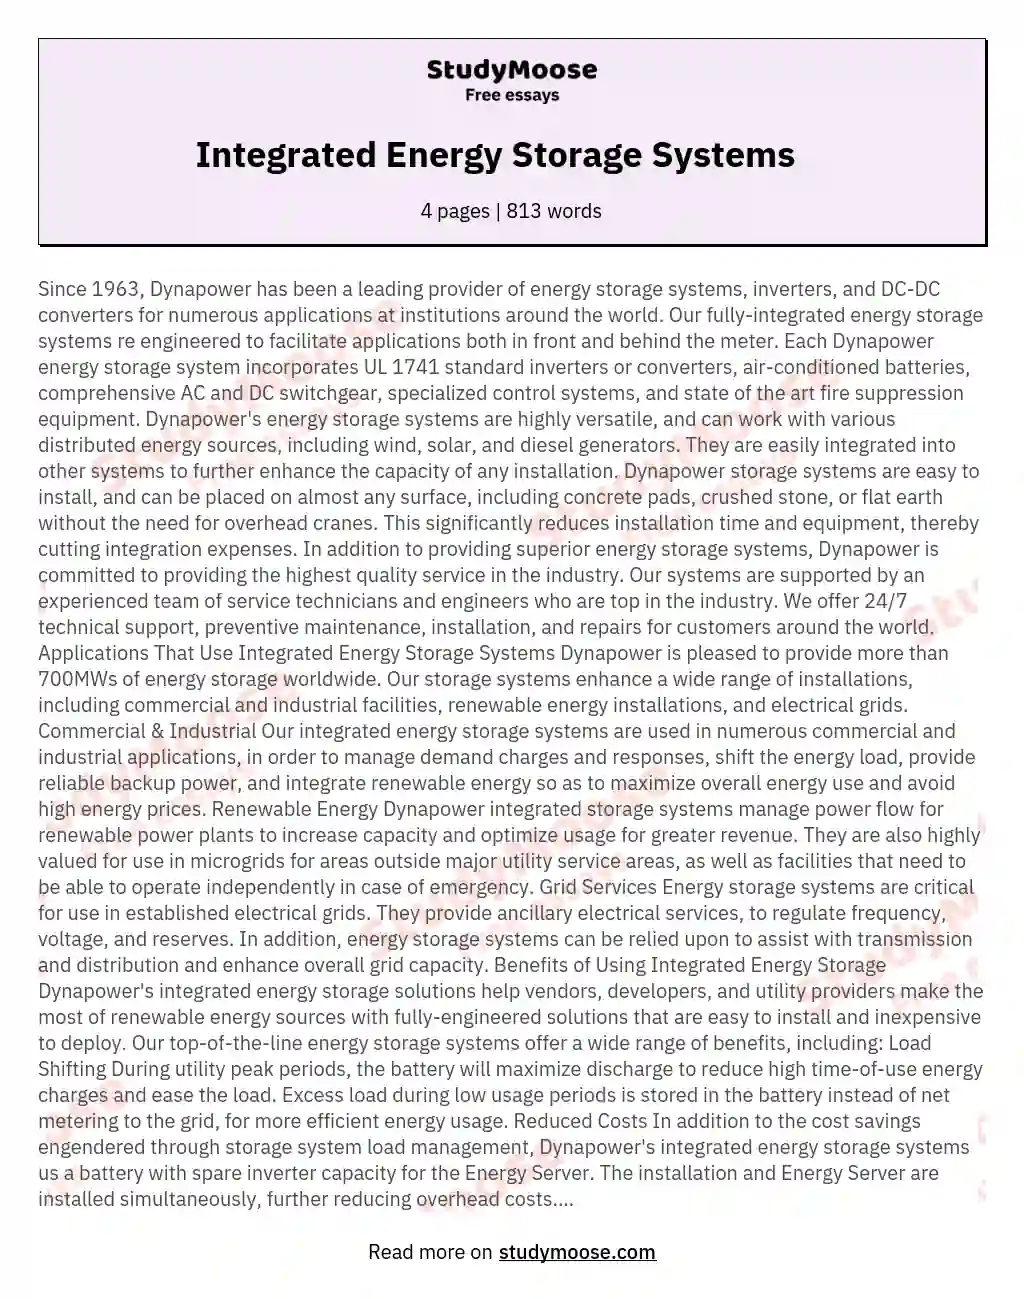 Integrated Energy Storage Systems     essay